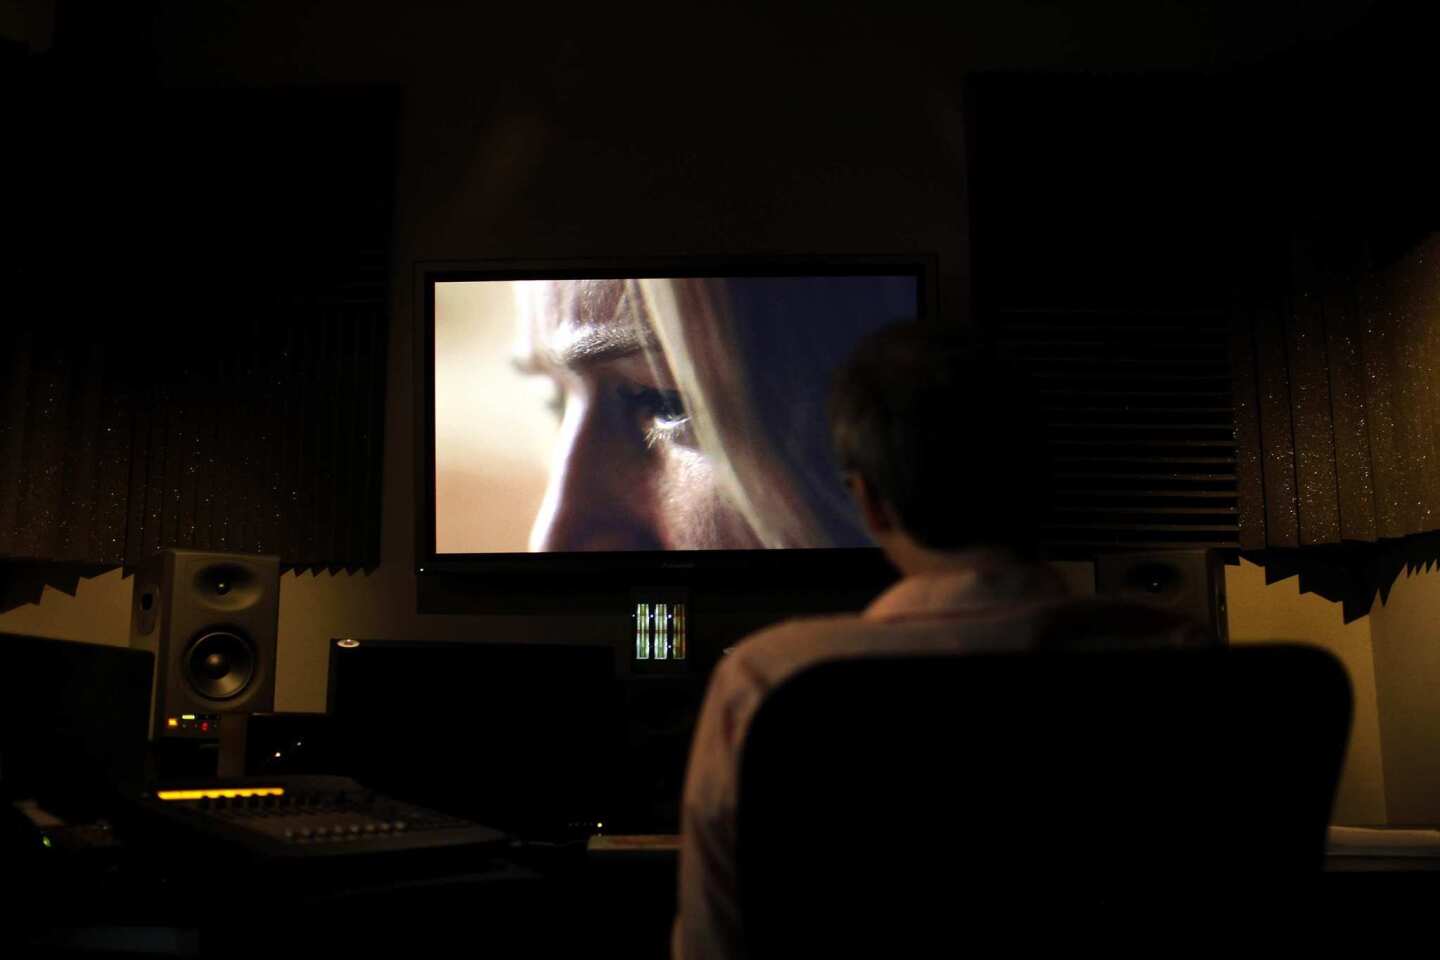 Road to Sundance: Writer and director Nick McCarthy checks the sound during opening scenes of his movie "The Pact," one last time at Secret Headquarters in Culver City.